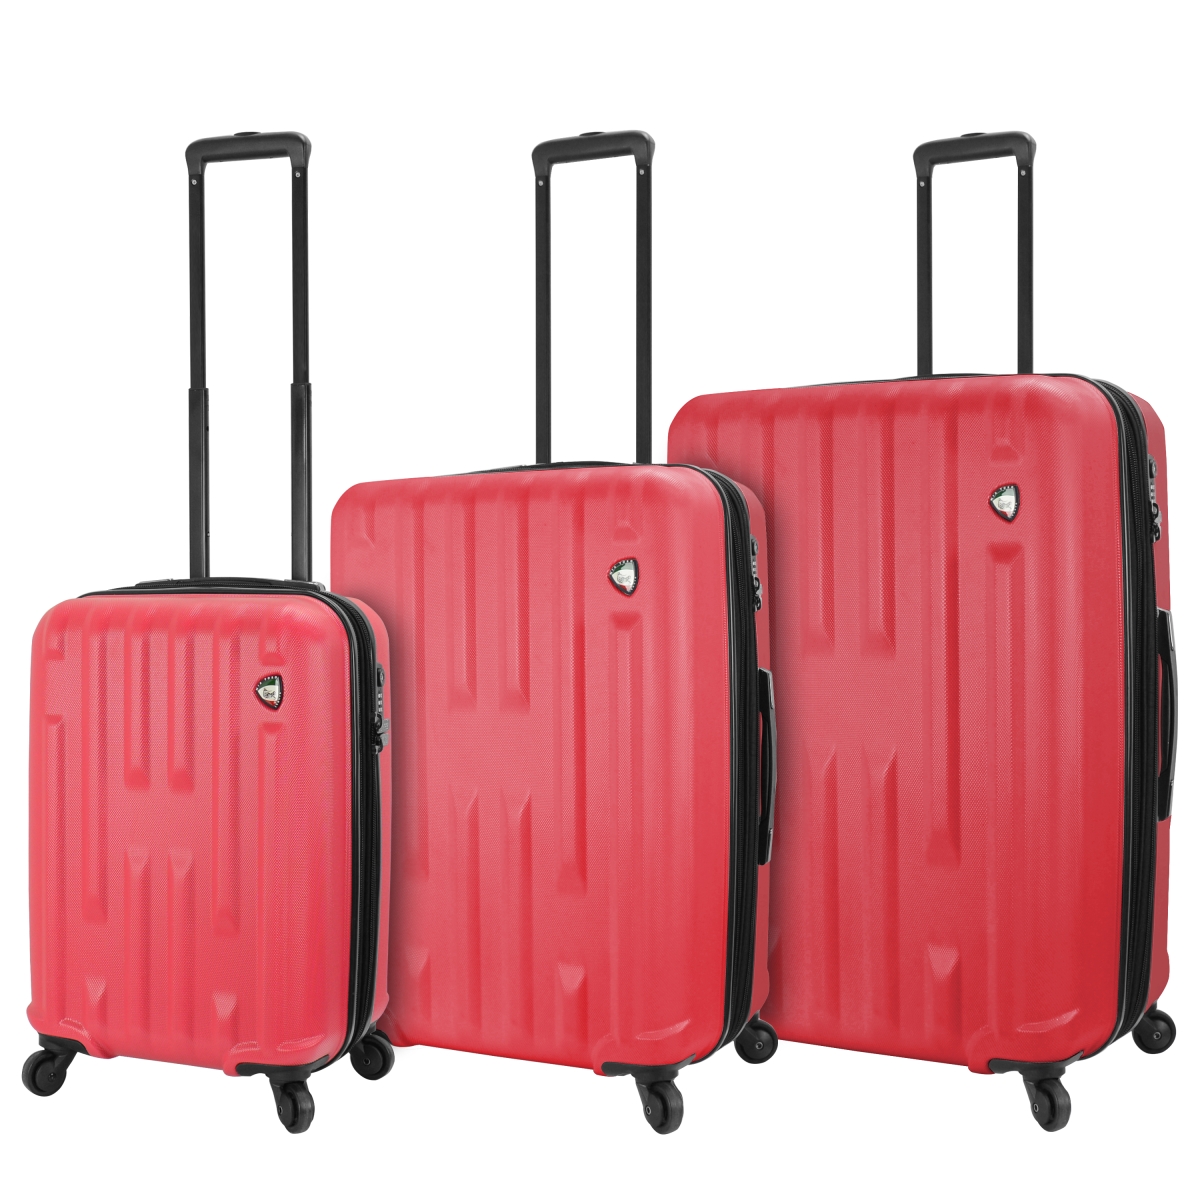 Italy M1230-03pc-red Nuovo Hardside Spinner Luggage Set, Red - 3 Piece